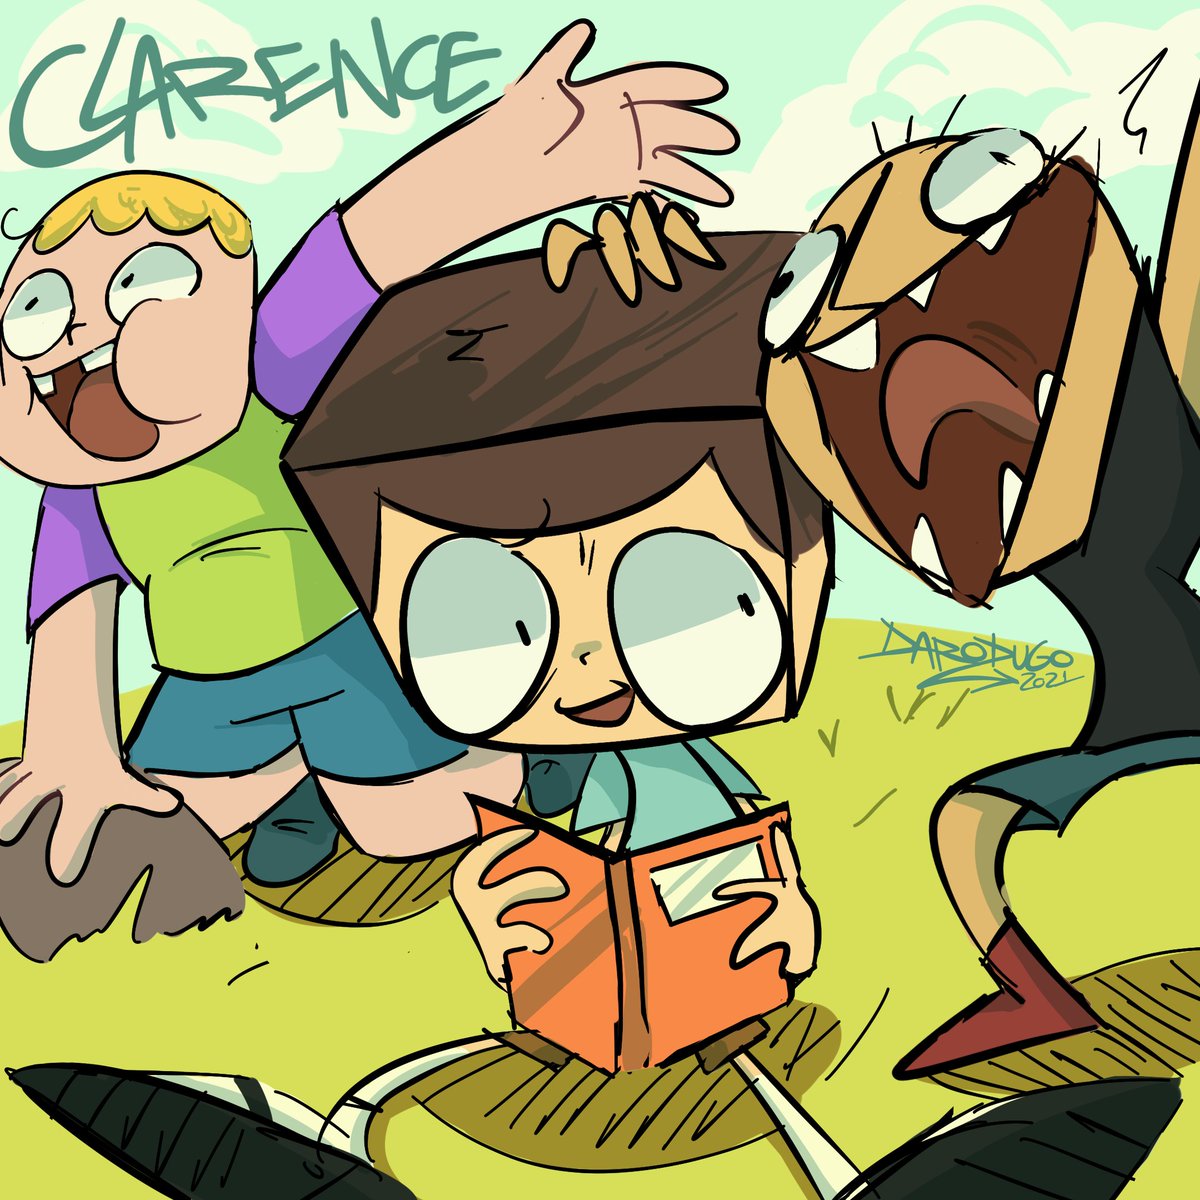 love this show:) #fanart #Clarence.